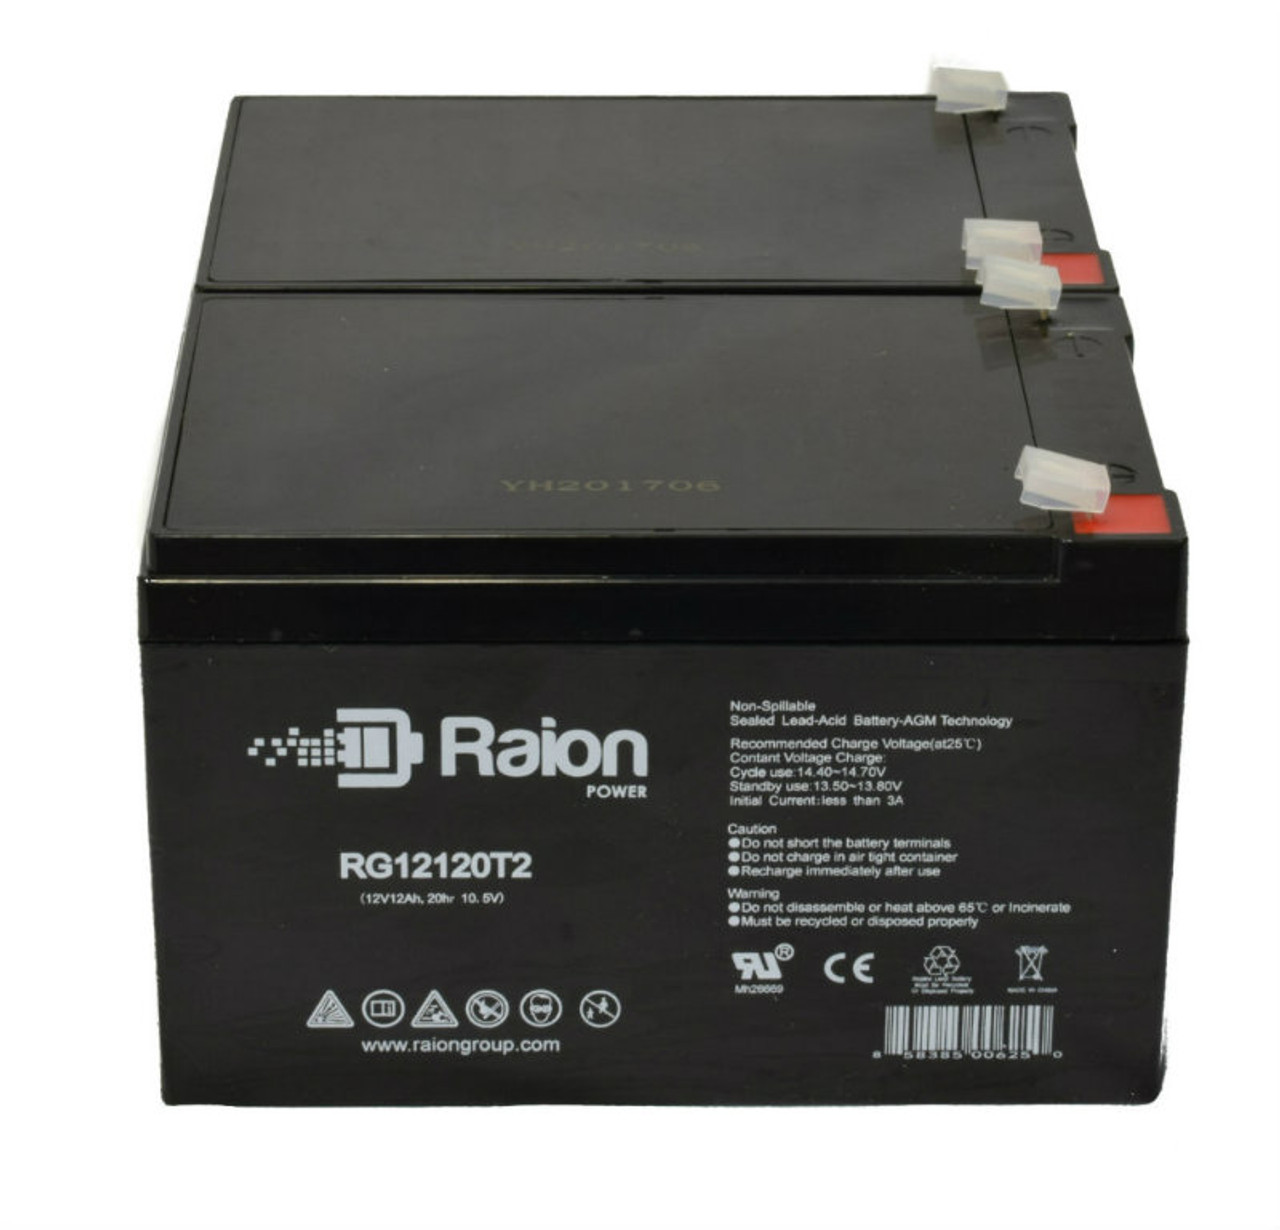 Raion Power 12V 12Ah Non-Spillable Compatible Replacement Battery for Napel NP12120 - (2 Pack)